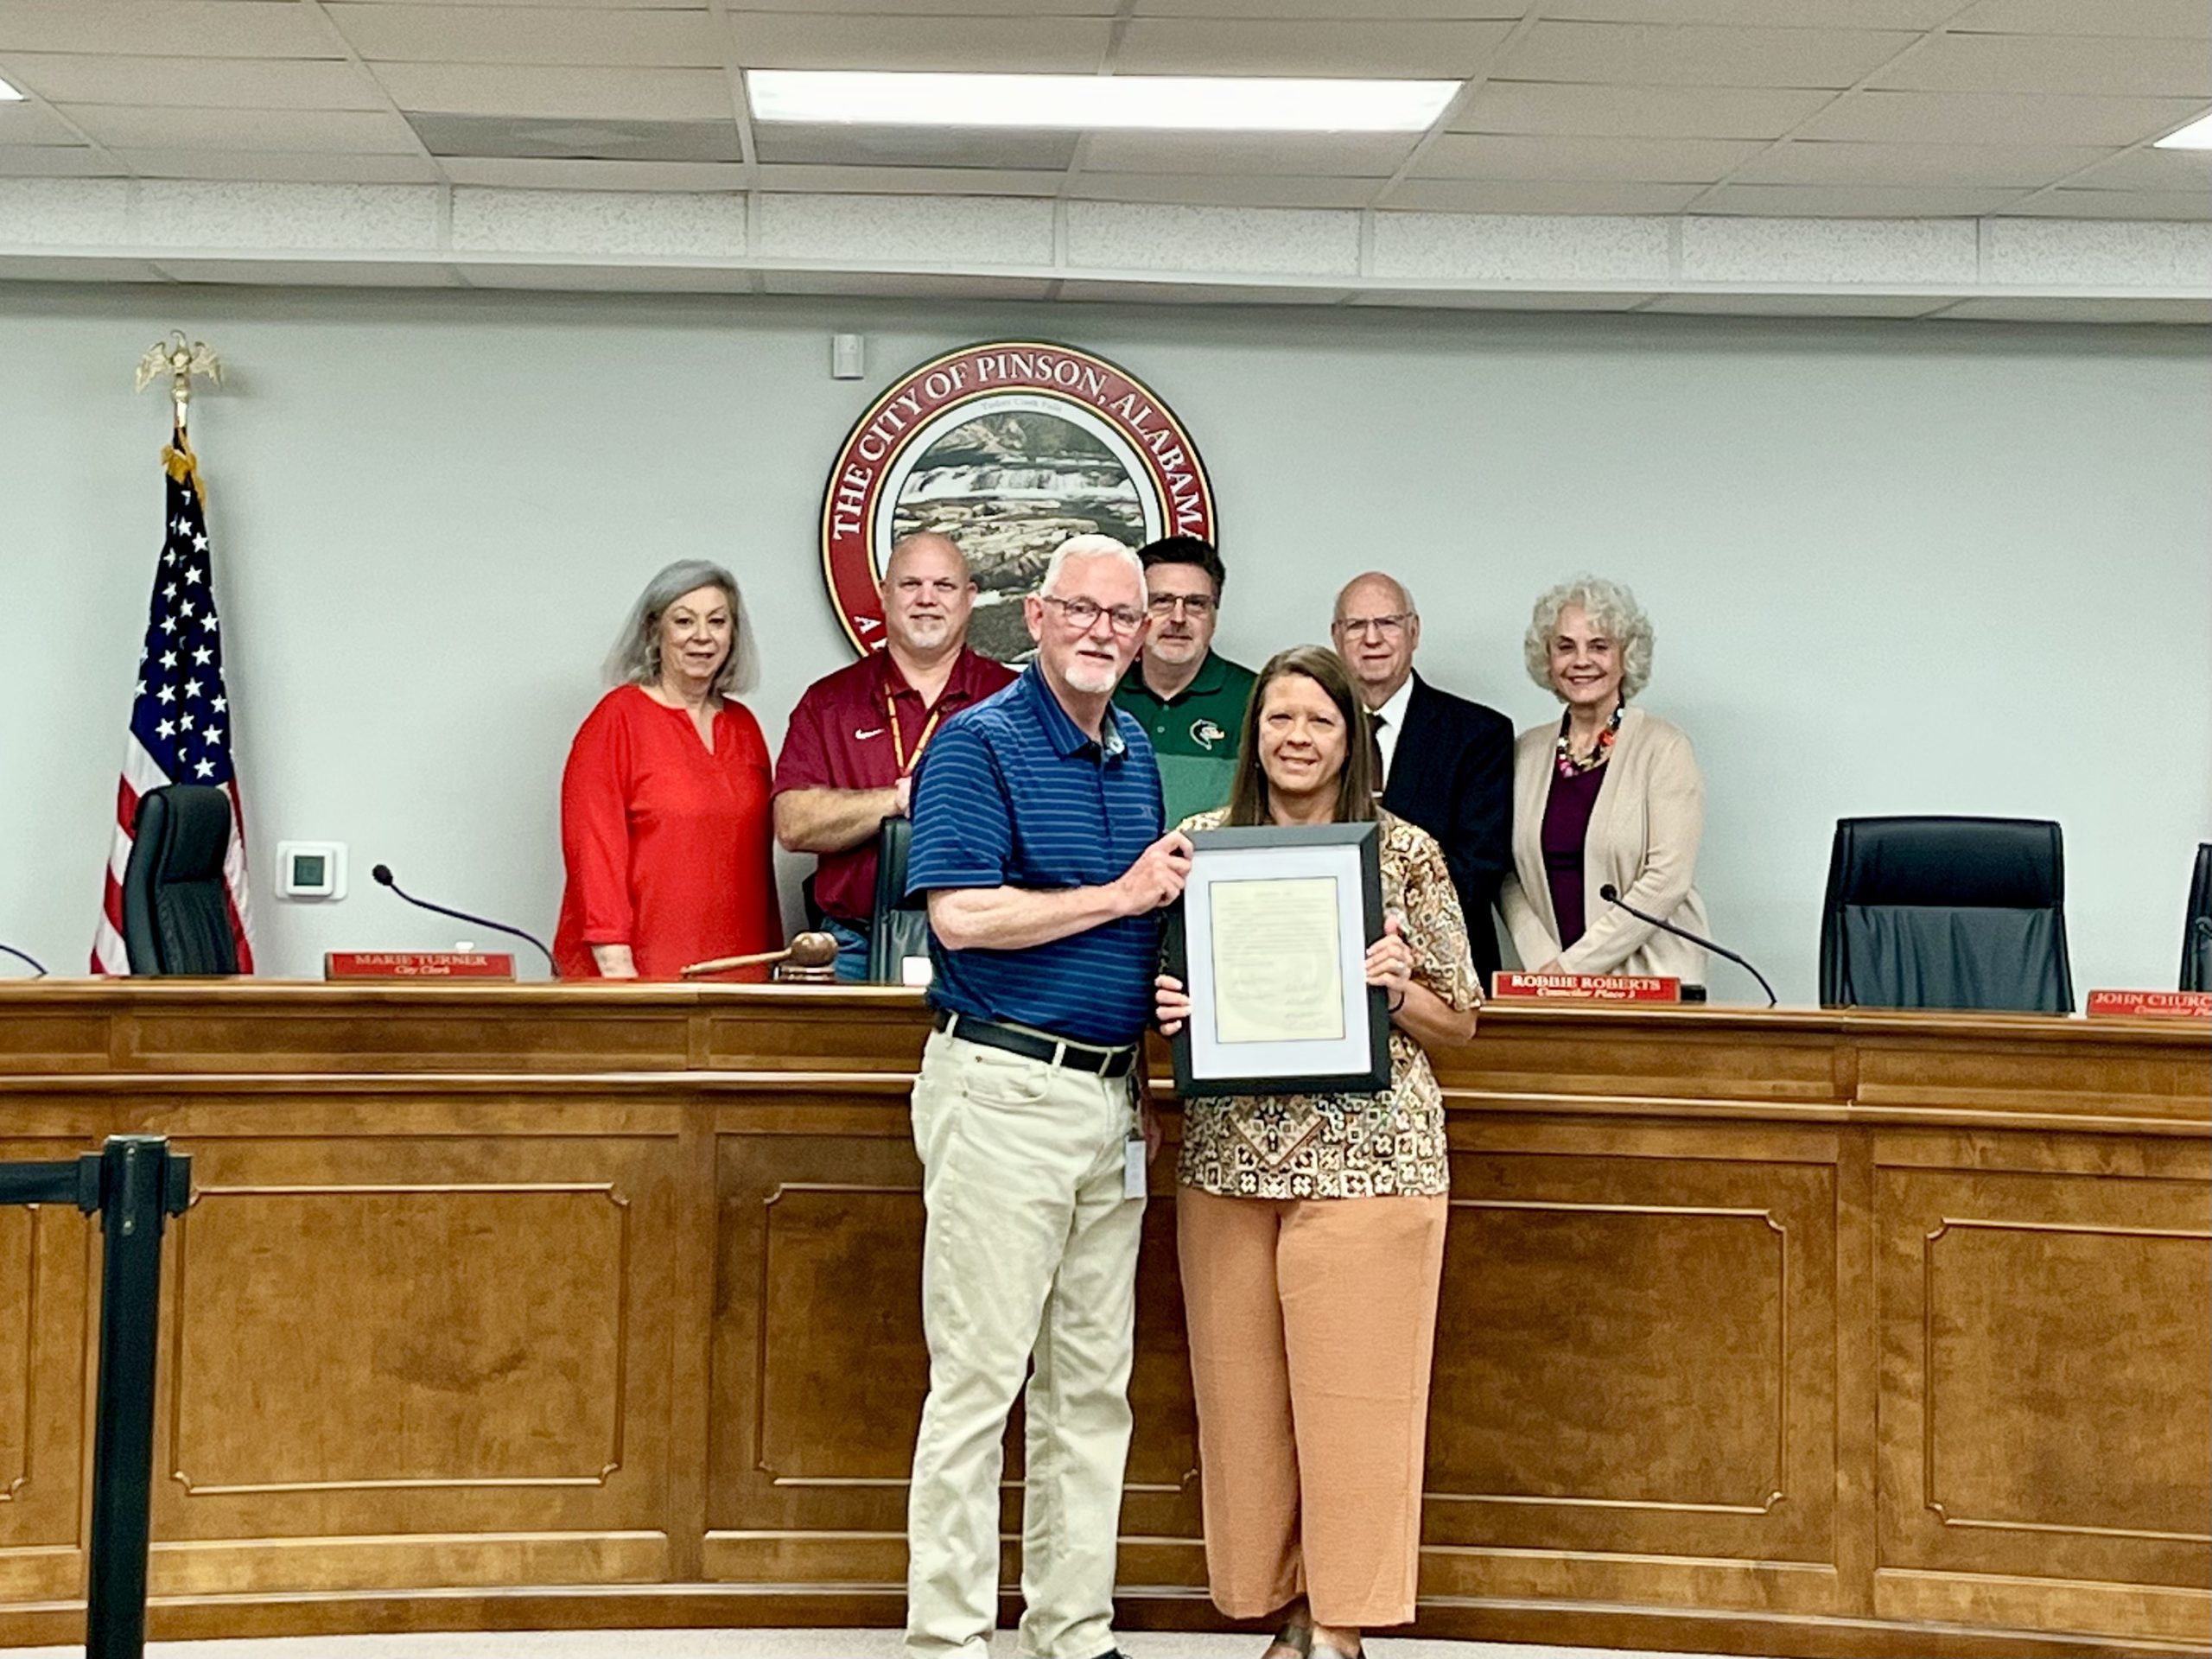 Pinson Council says farewell to Dawn Tanner with resolution, reception